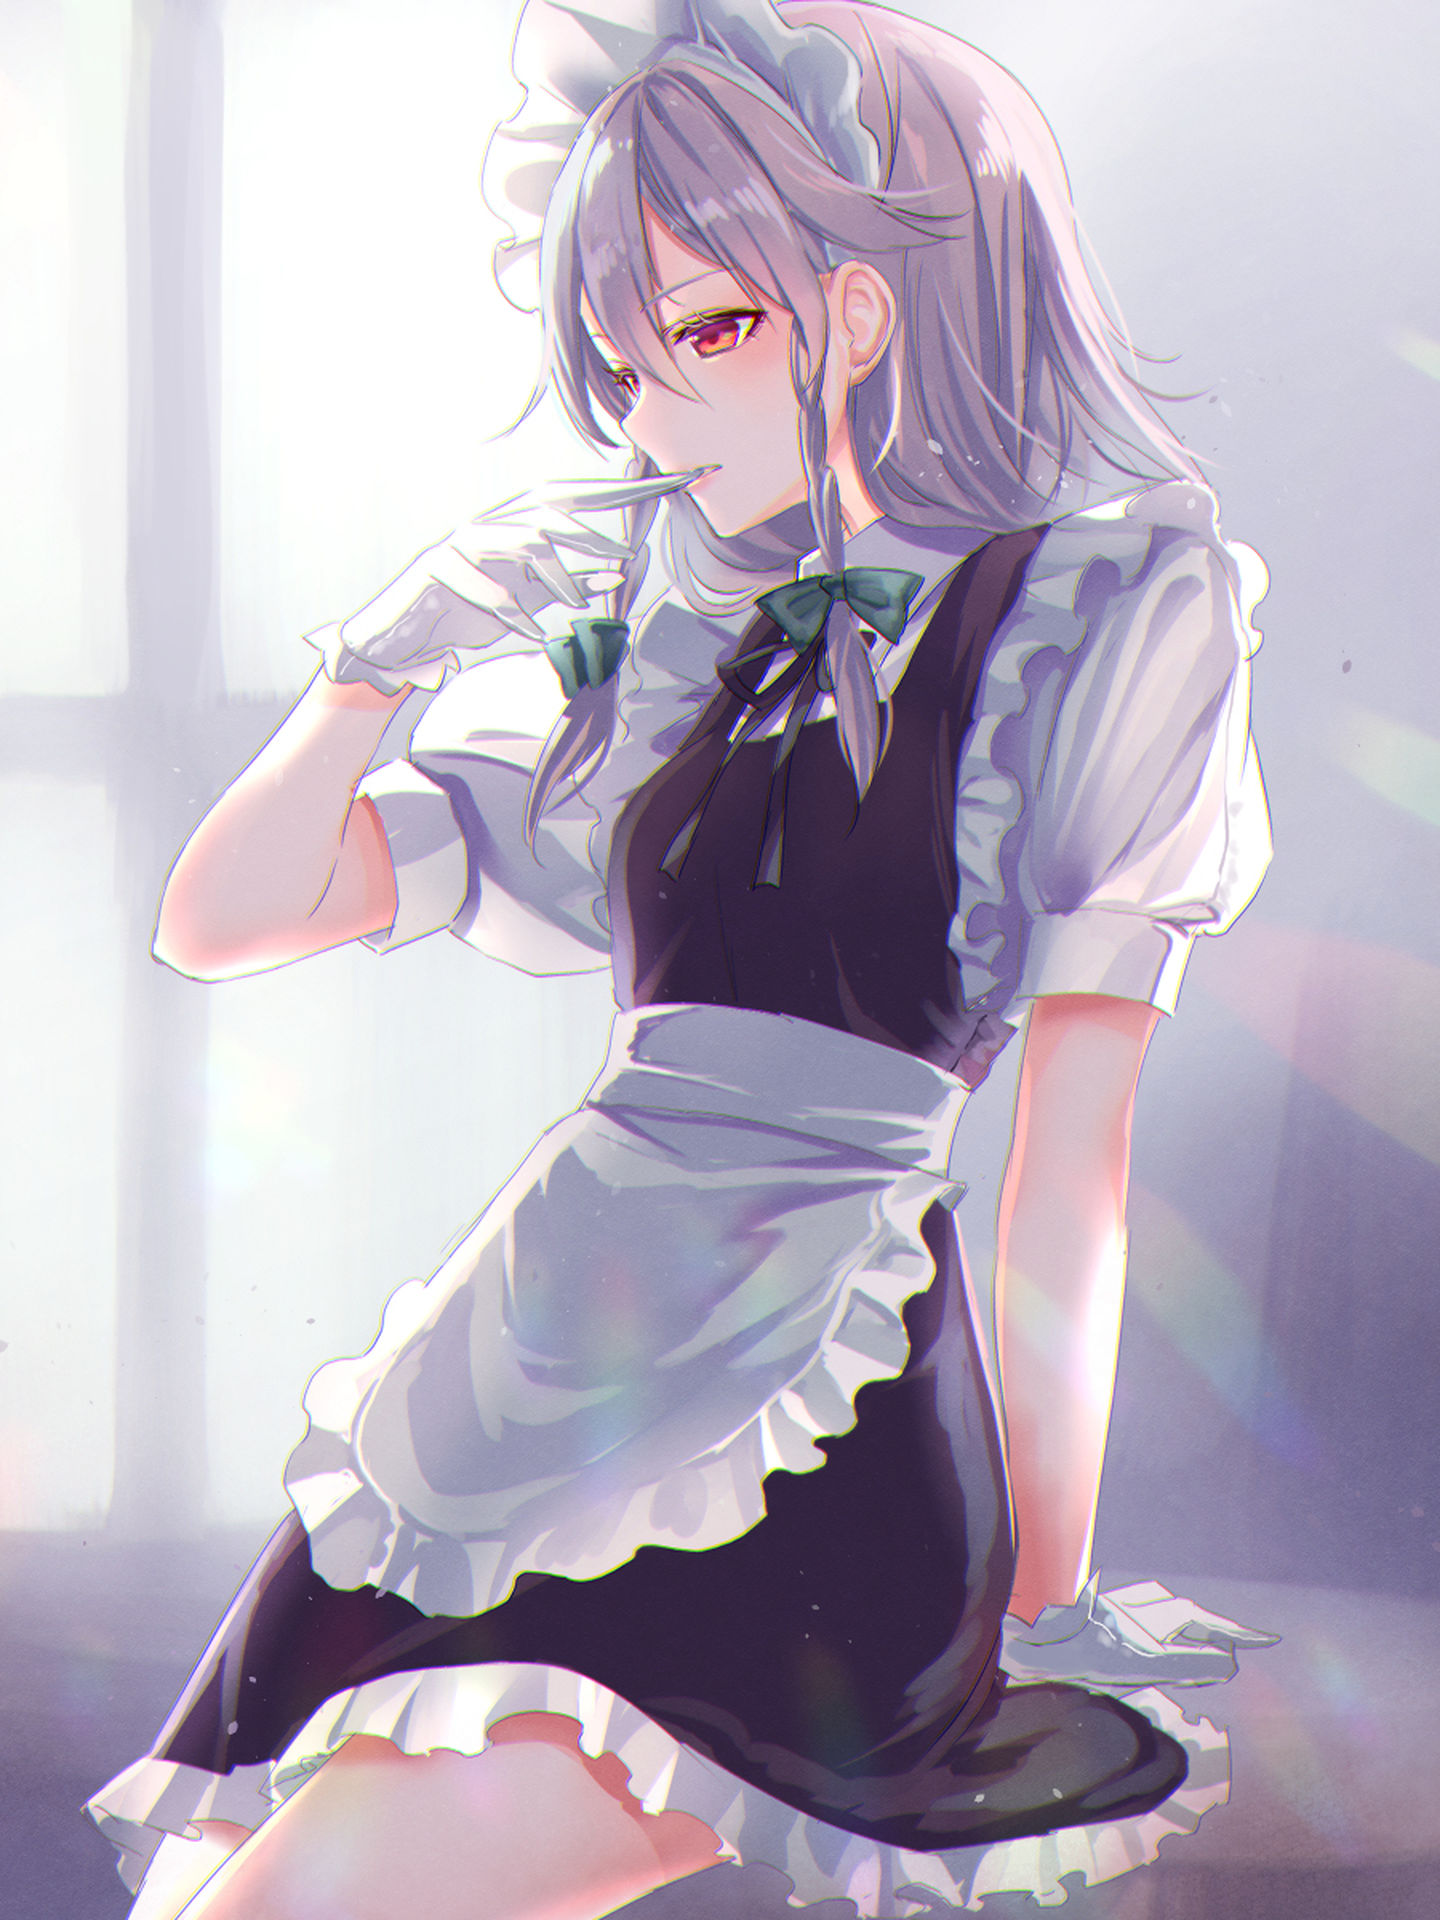 red eyes, purple hair, braids, anime, anime girls, maid outfit, Touhou ...